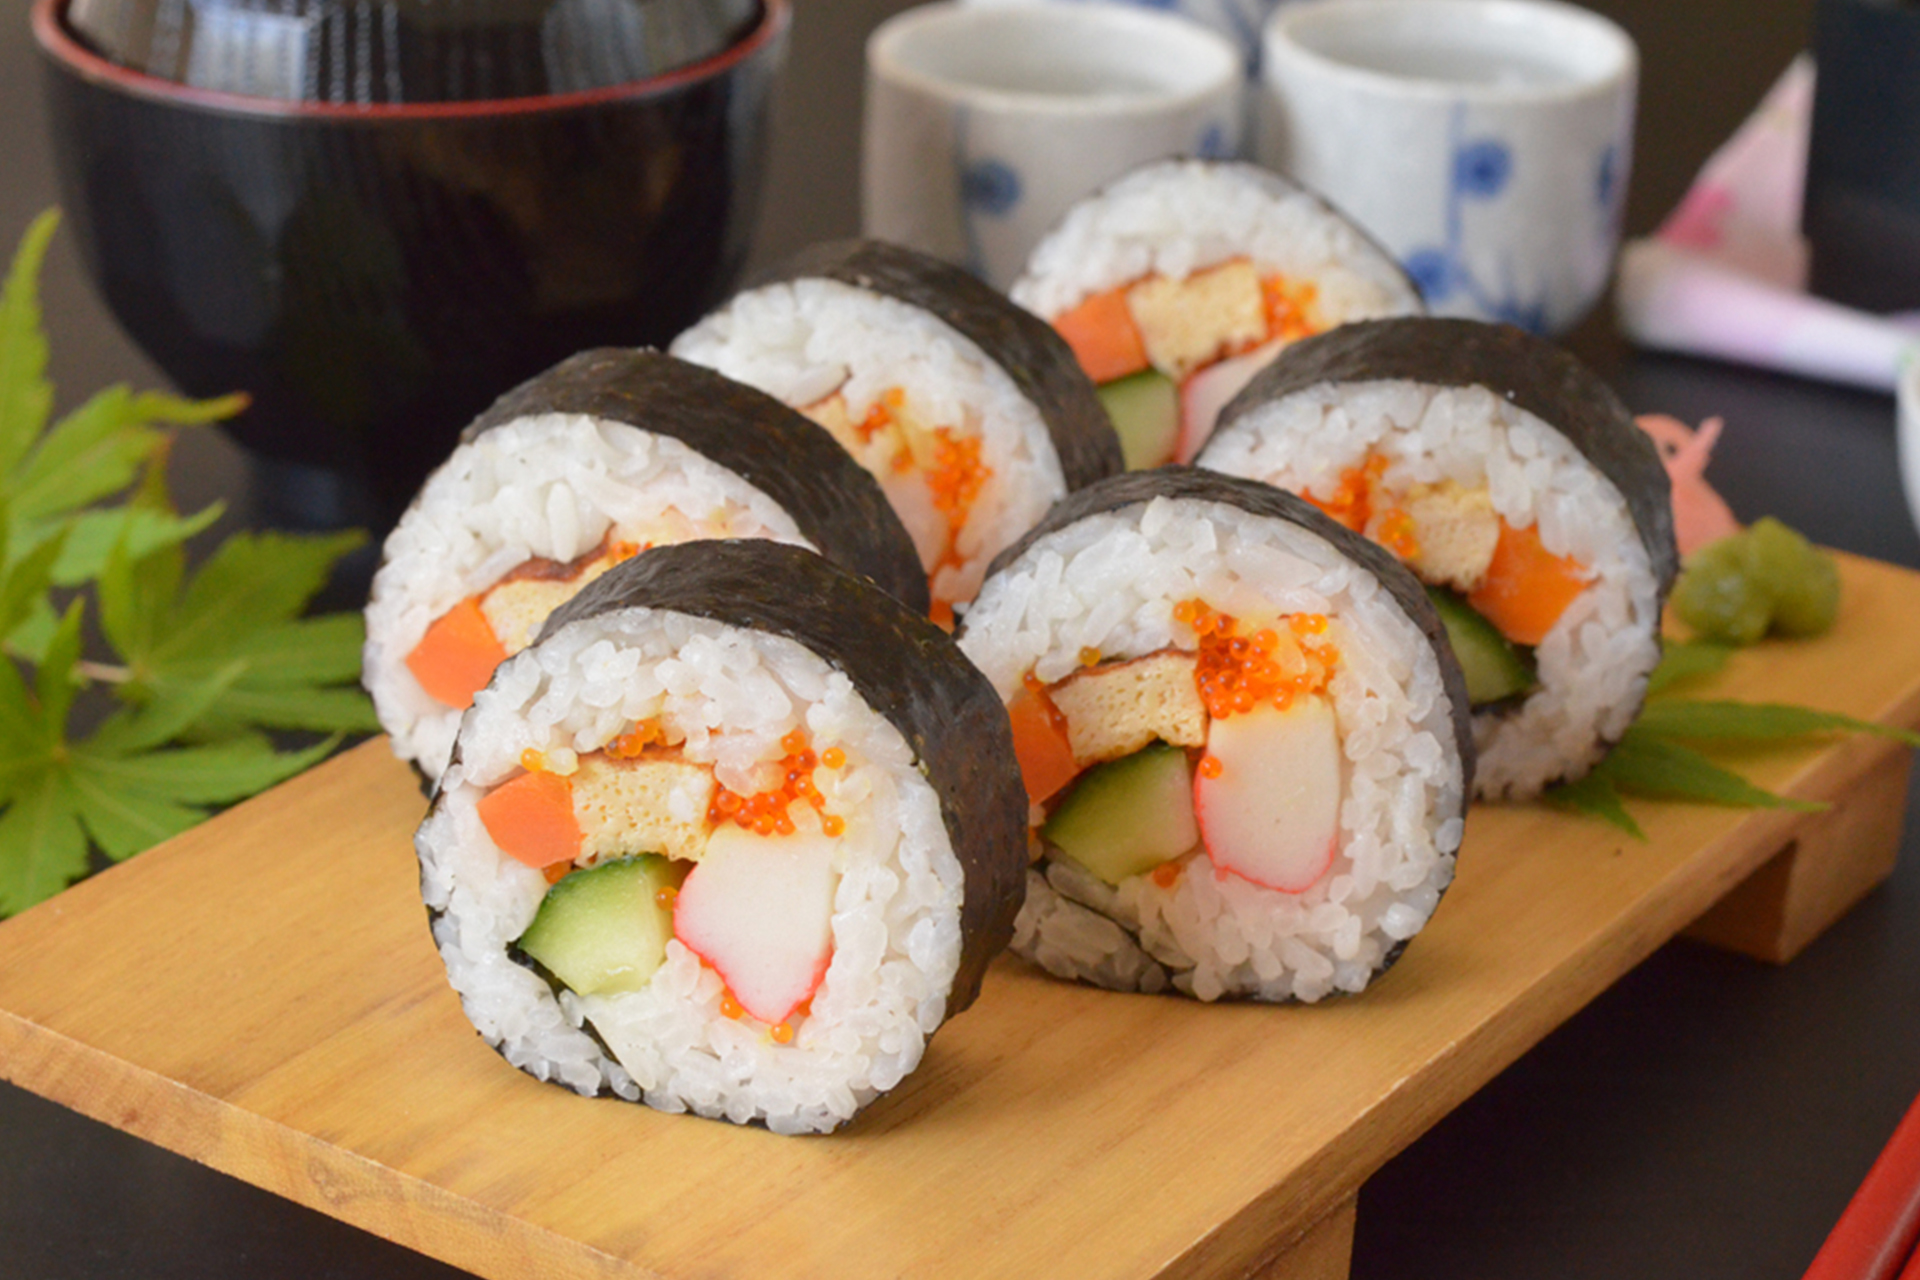 Step-by-step: How to make your own sushi rolls | Asian Inspirations